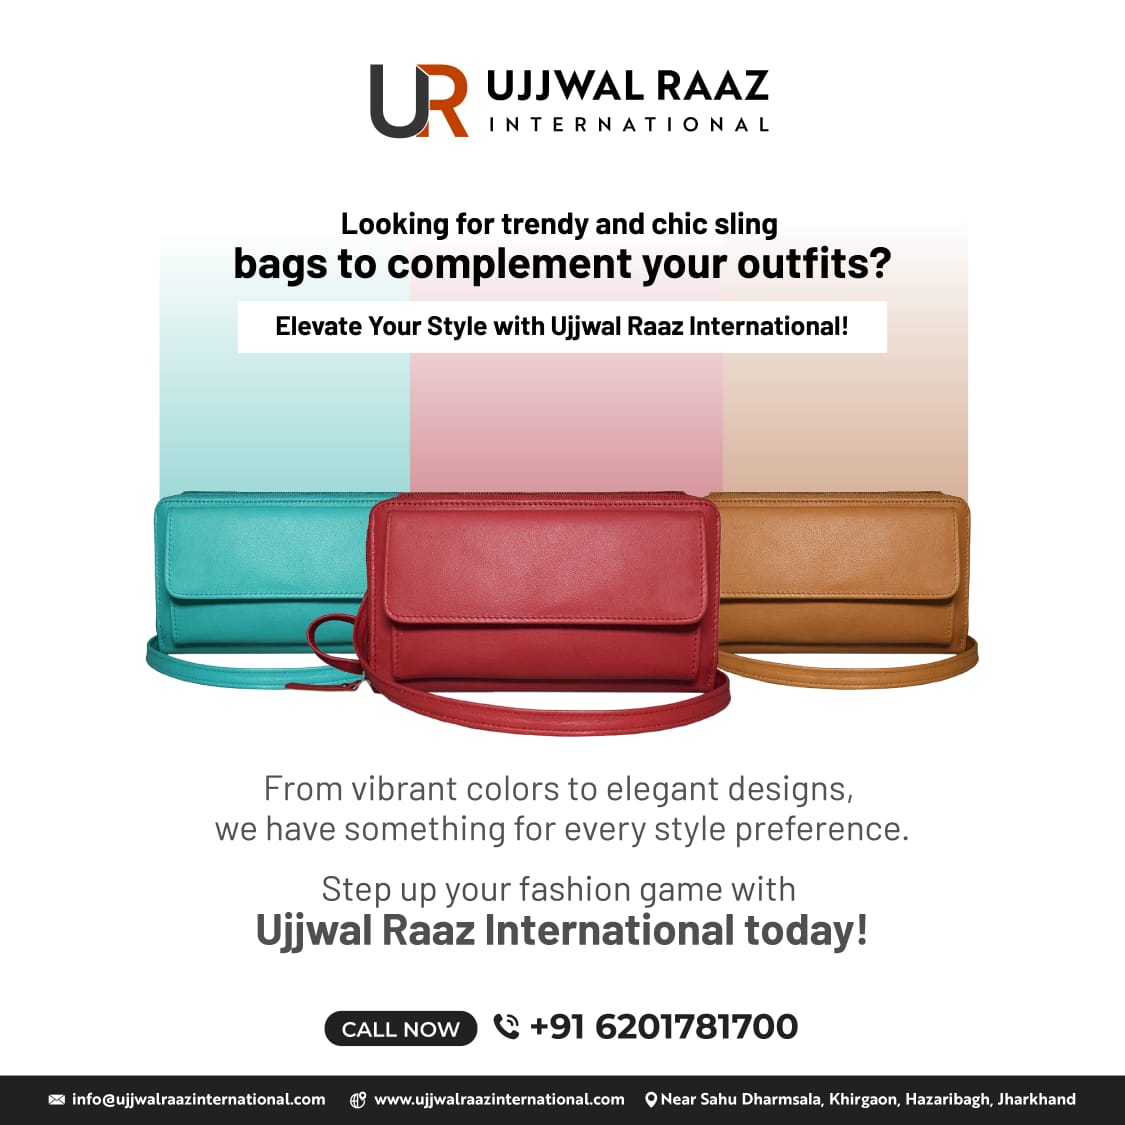 Elevate your style with chic sling bags from Ujjwal Raaz International! Made of fine leather, they're perfect for any occasion. 

Explore now for fashion-forward accessories that add sophistication to your wardrobe! 

#SlingBags #FashionEssentials #UjjwalRaazInternational